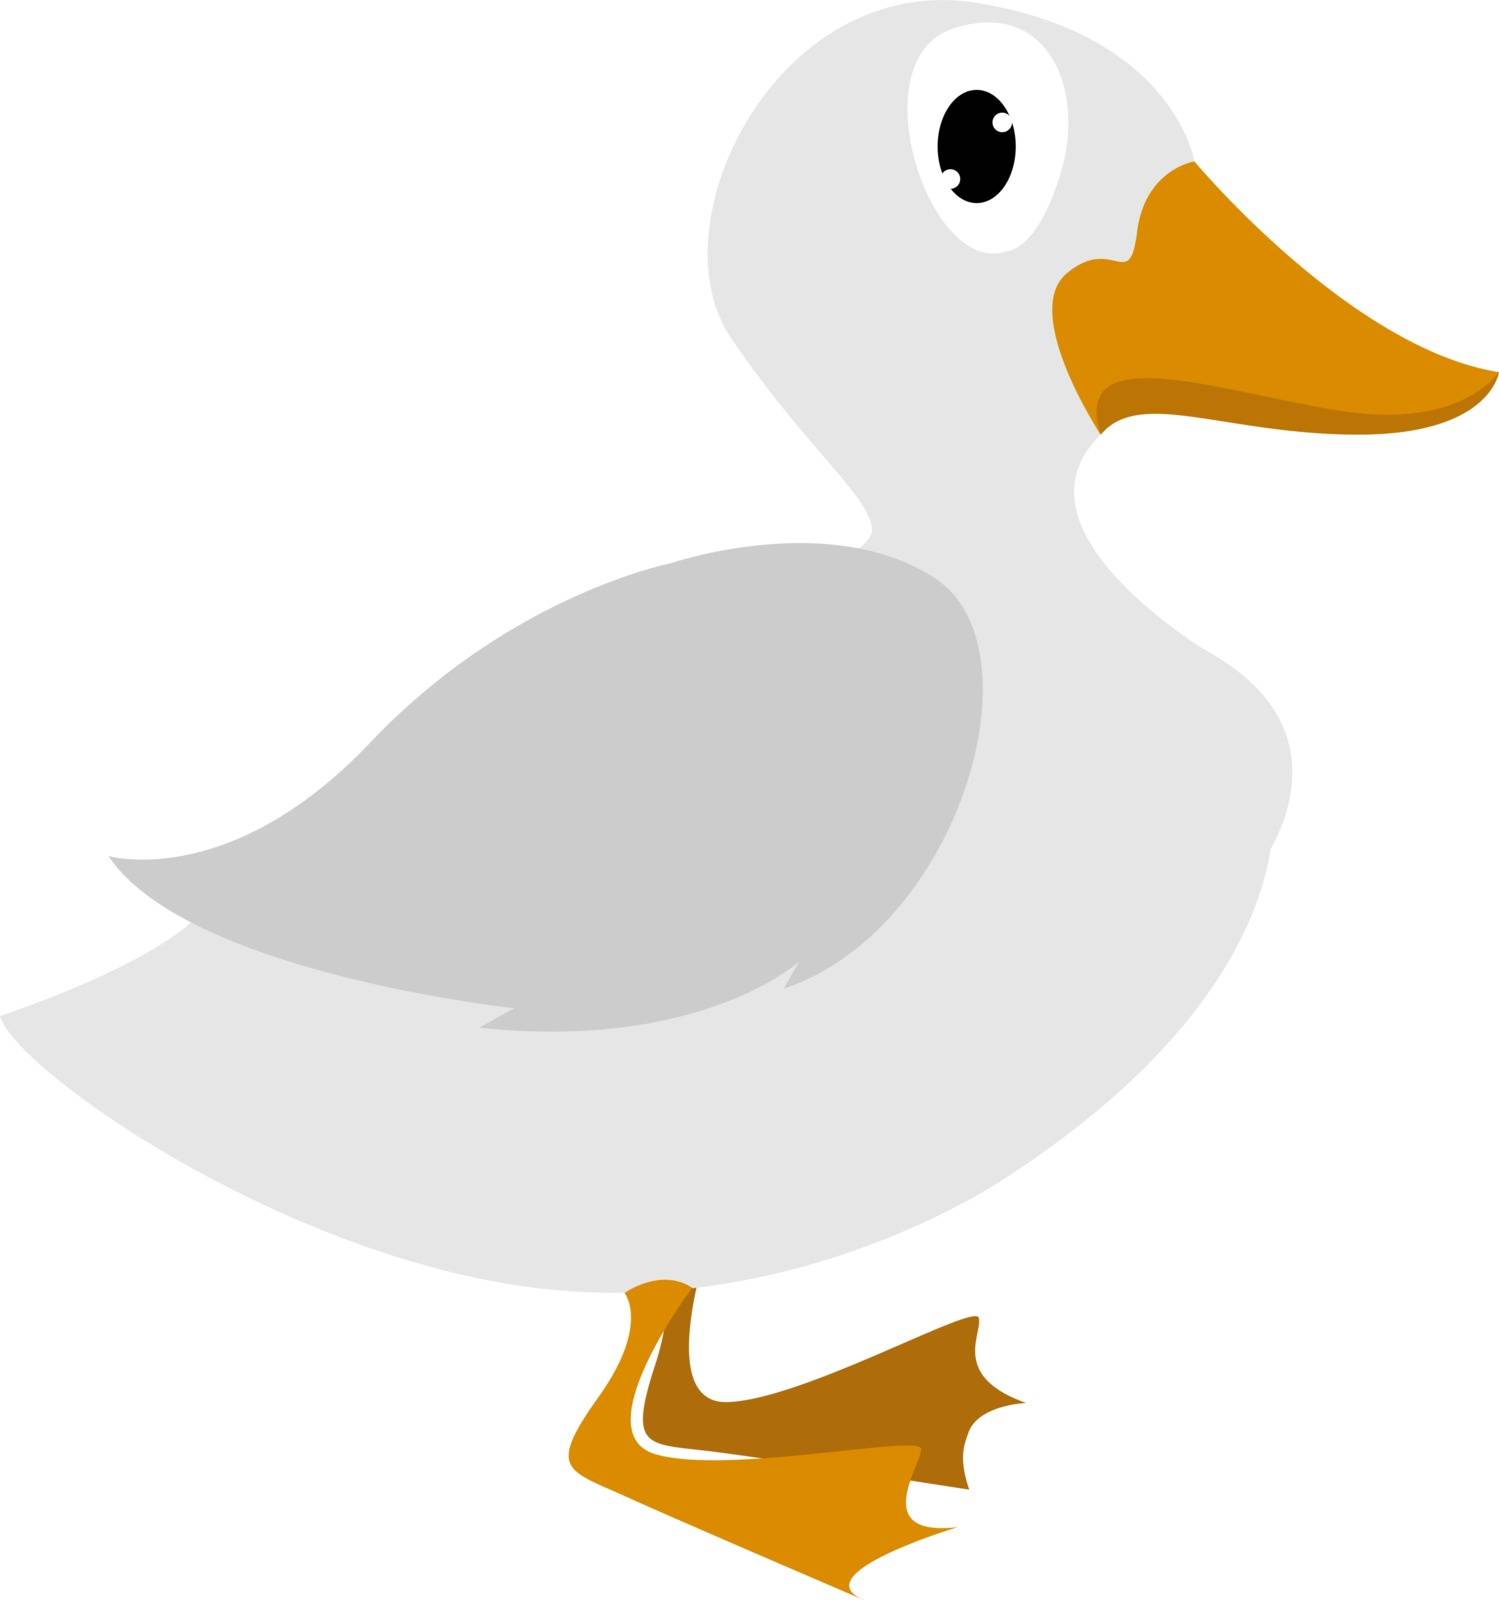 Domestic duck, illustration, vector on white background.